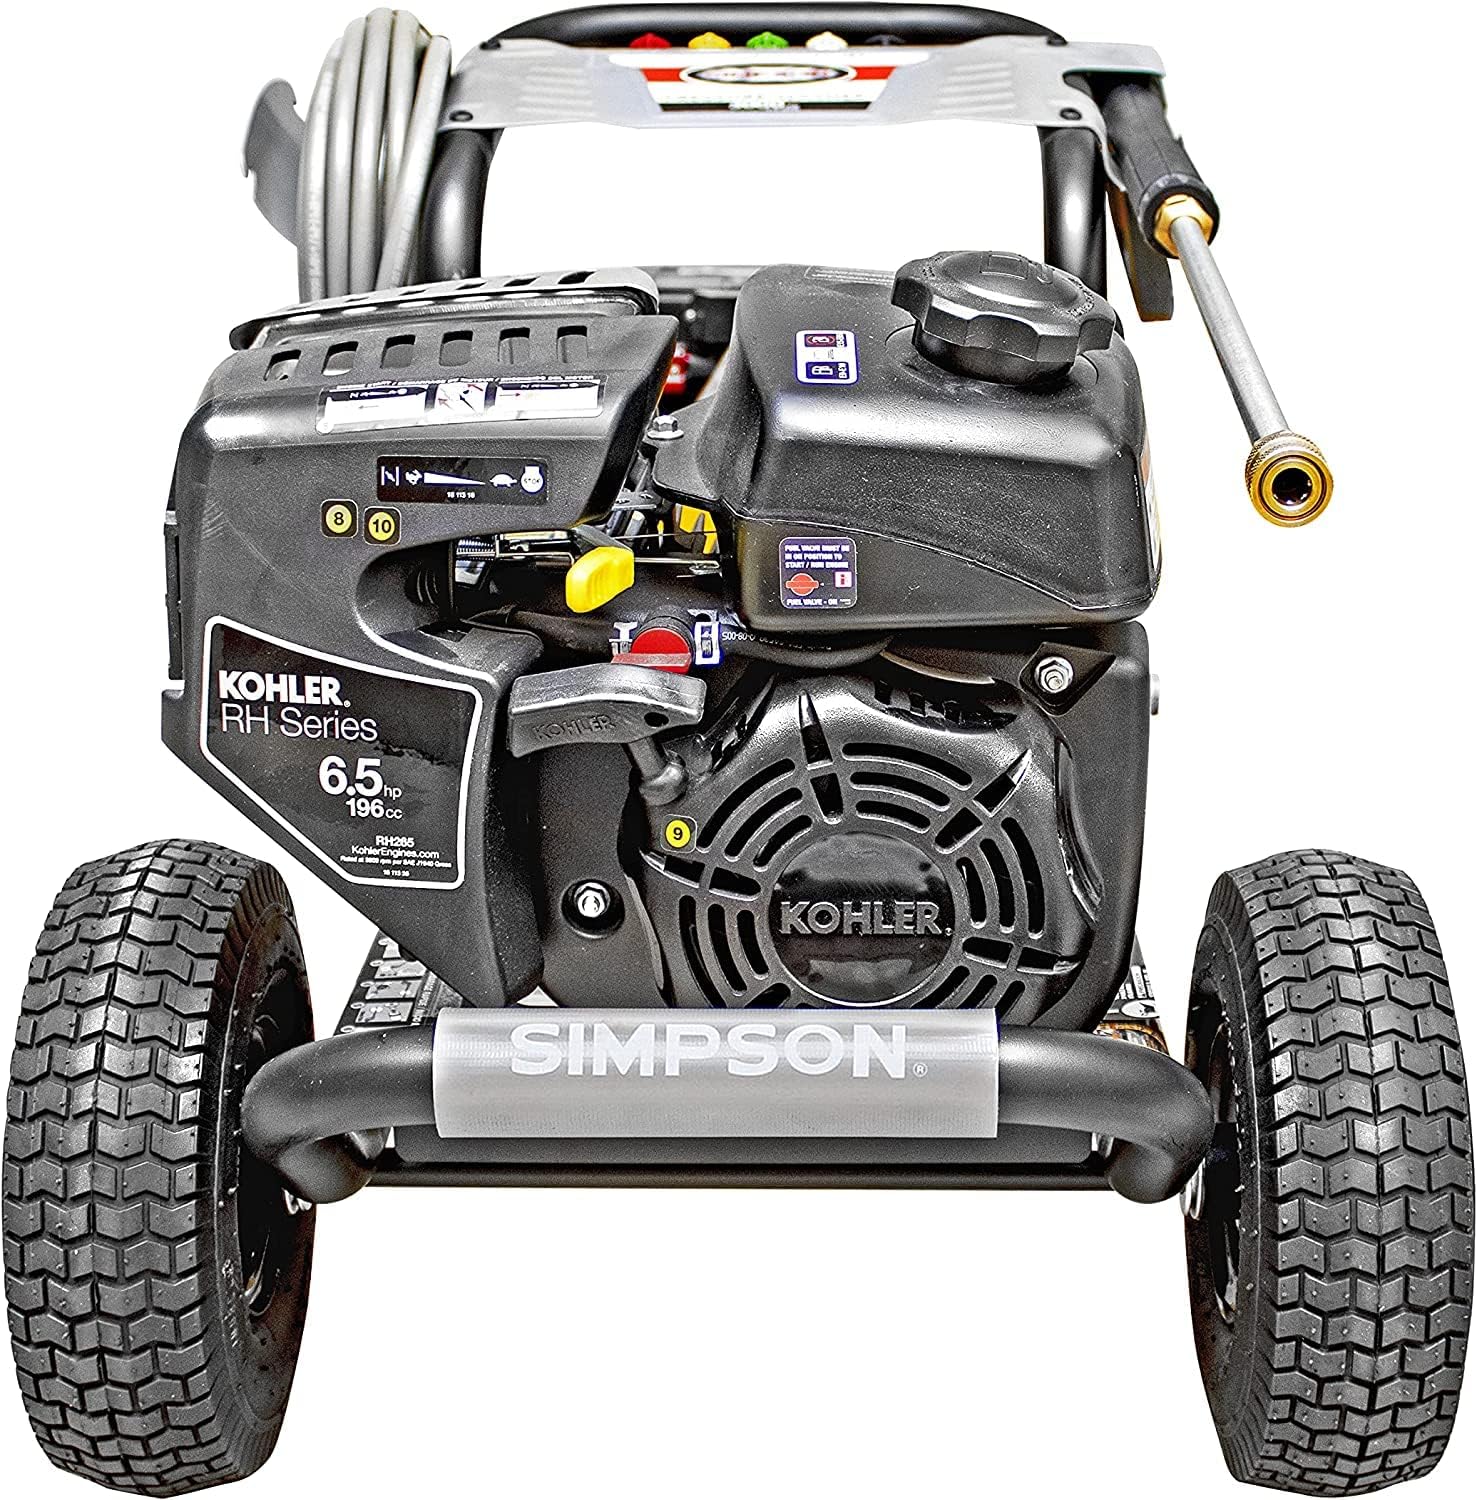 SIMPSON Cleaning MS60763-S MegaShot 3100 PSI Gas Pressure Washer, 2.4 GPM, Kohler RH265 Engine, Includes Spray Gun and Extension Wand, 5 QC Nozzle Tips, 1/4-in. x 25-ft. MorFlex Hose Pressure Washer 3100 PSI Honda RH265